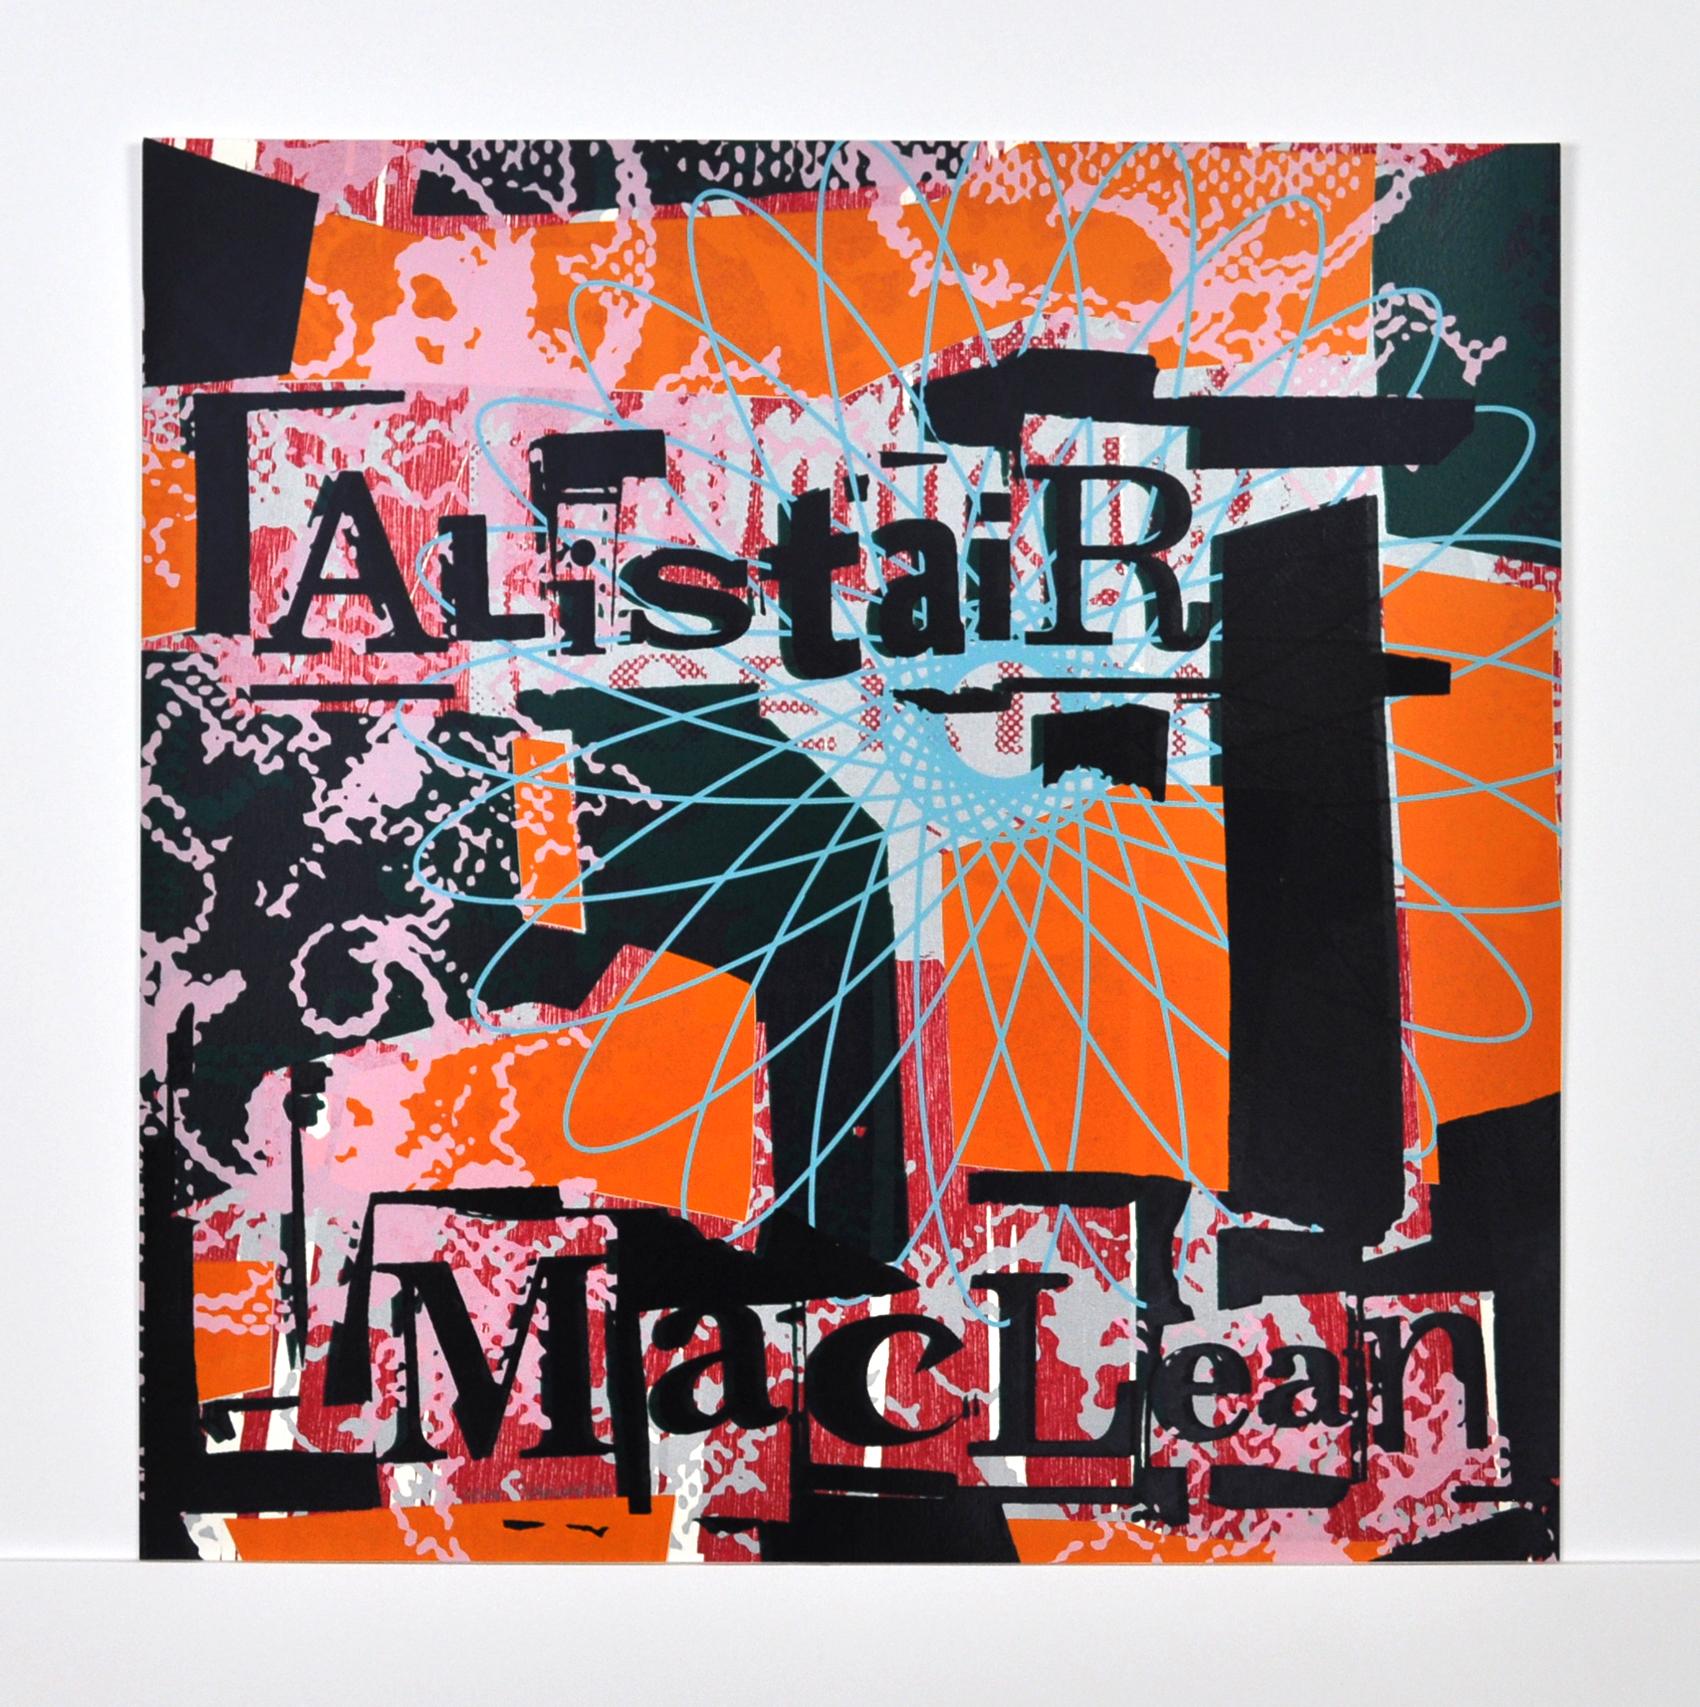 Scandinavian Screen Print and Woodcut “Alistair MacLean” , numbered and signed - Contemporary Mixed Media Art by Lars Grenaae